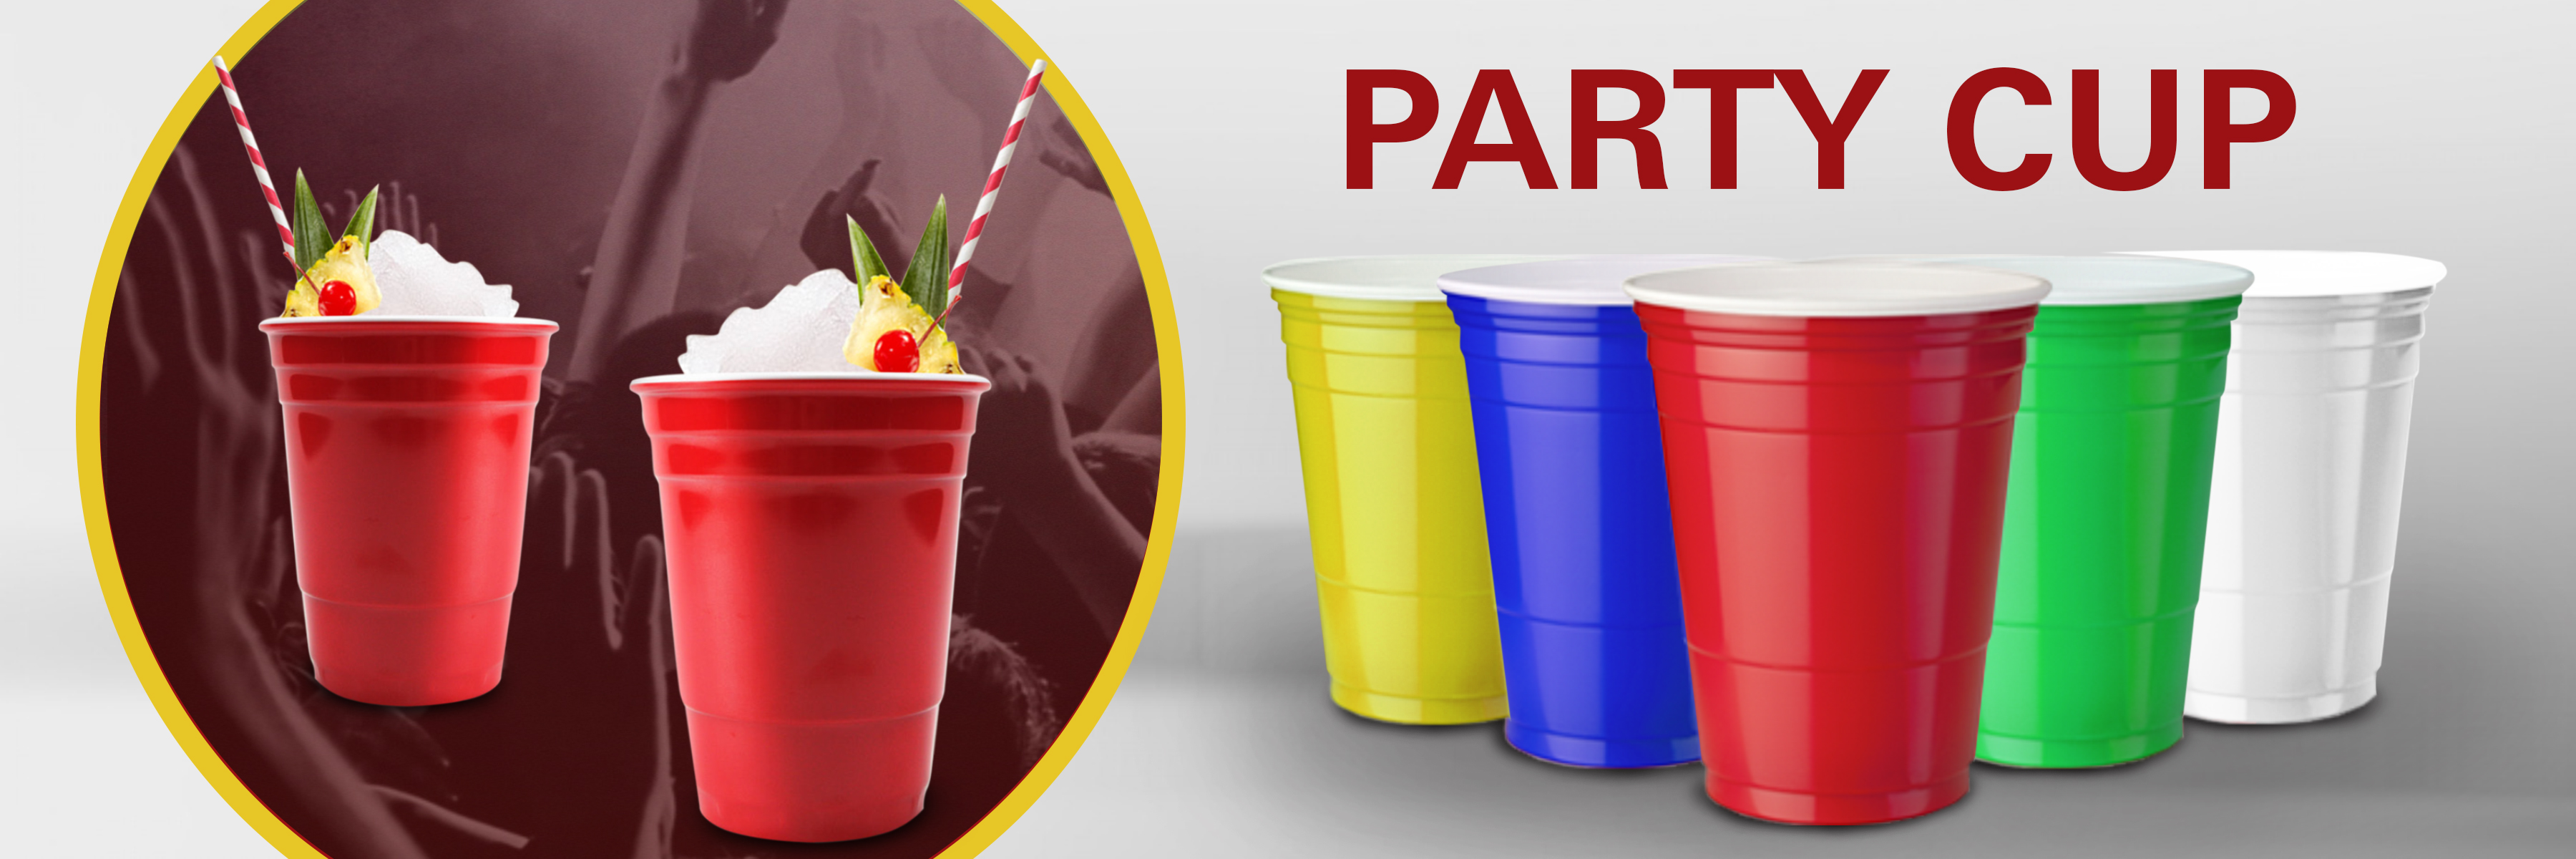 red party cup